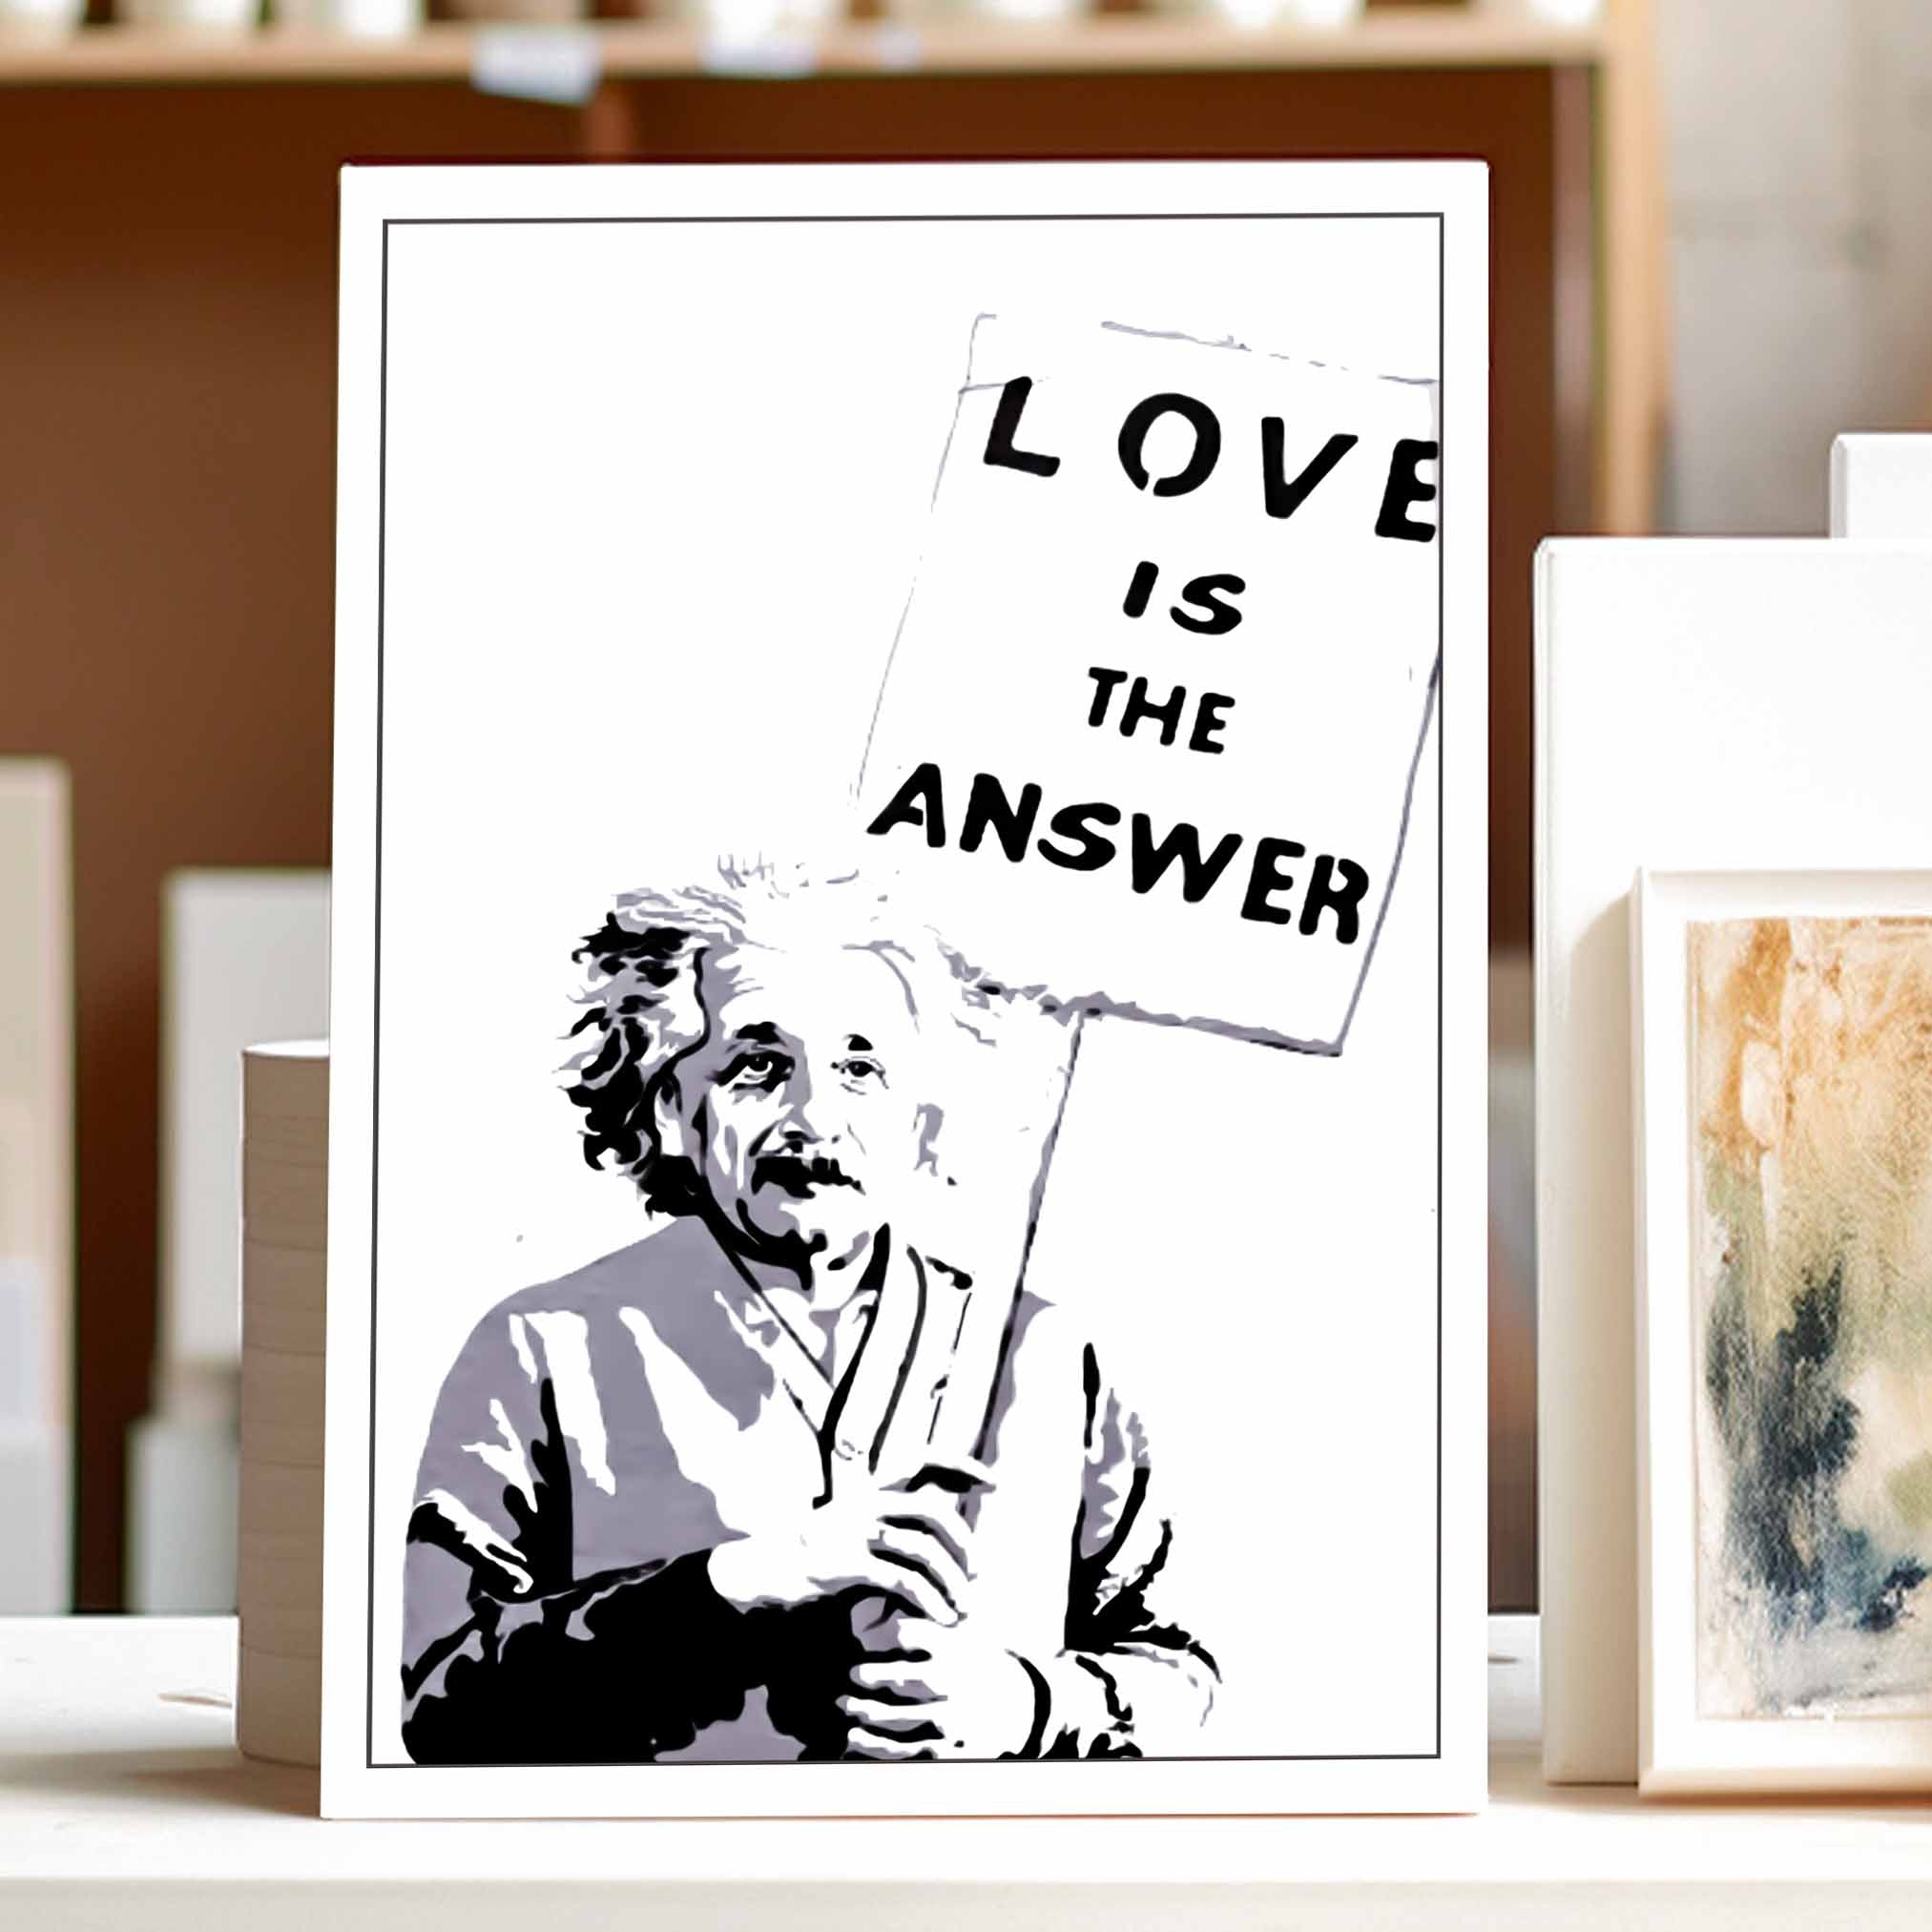 BANKSY - Love is the answer